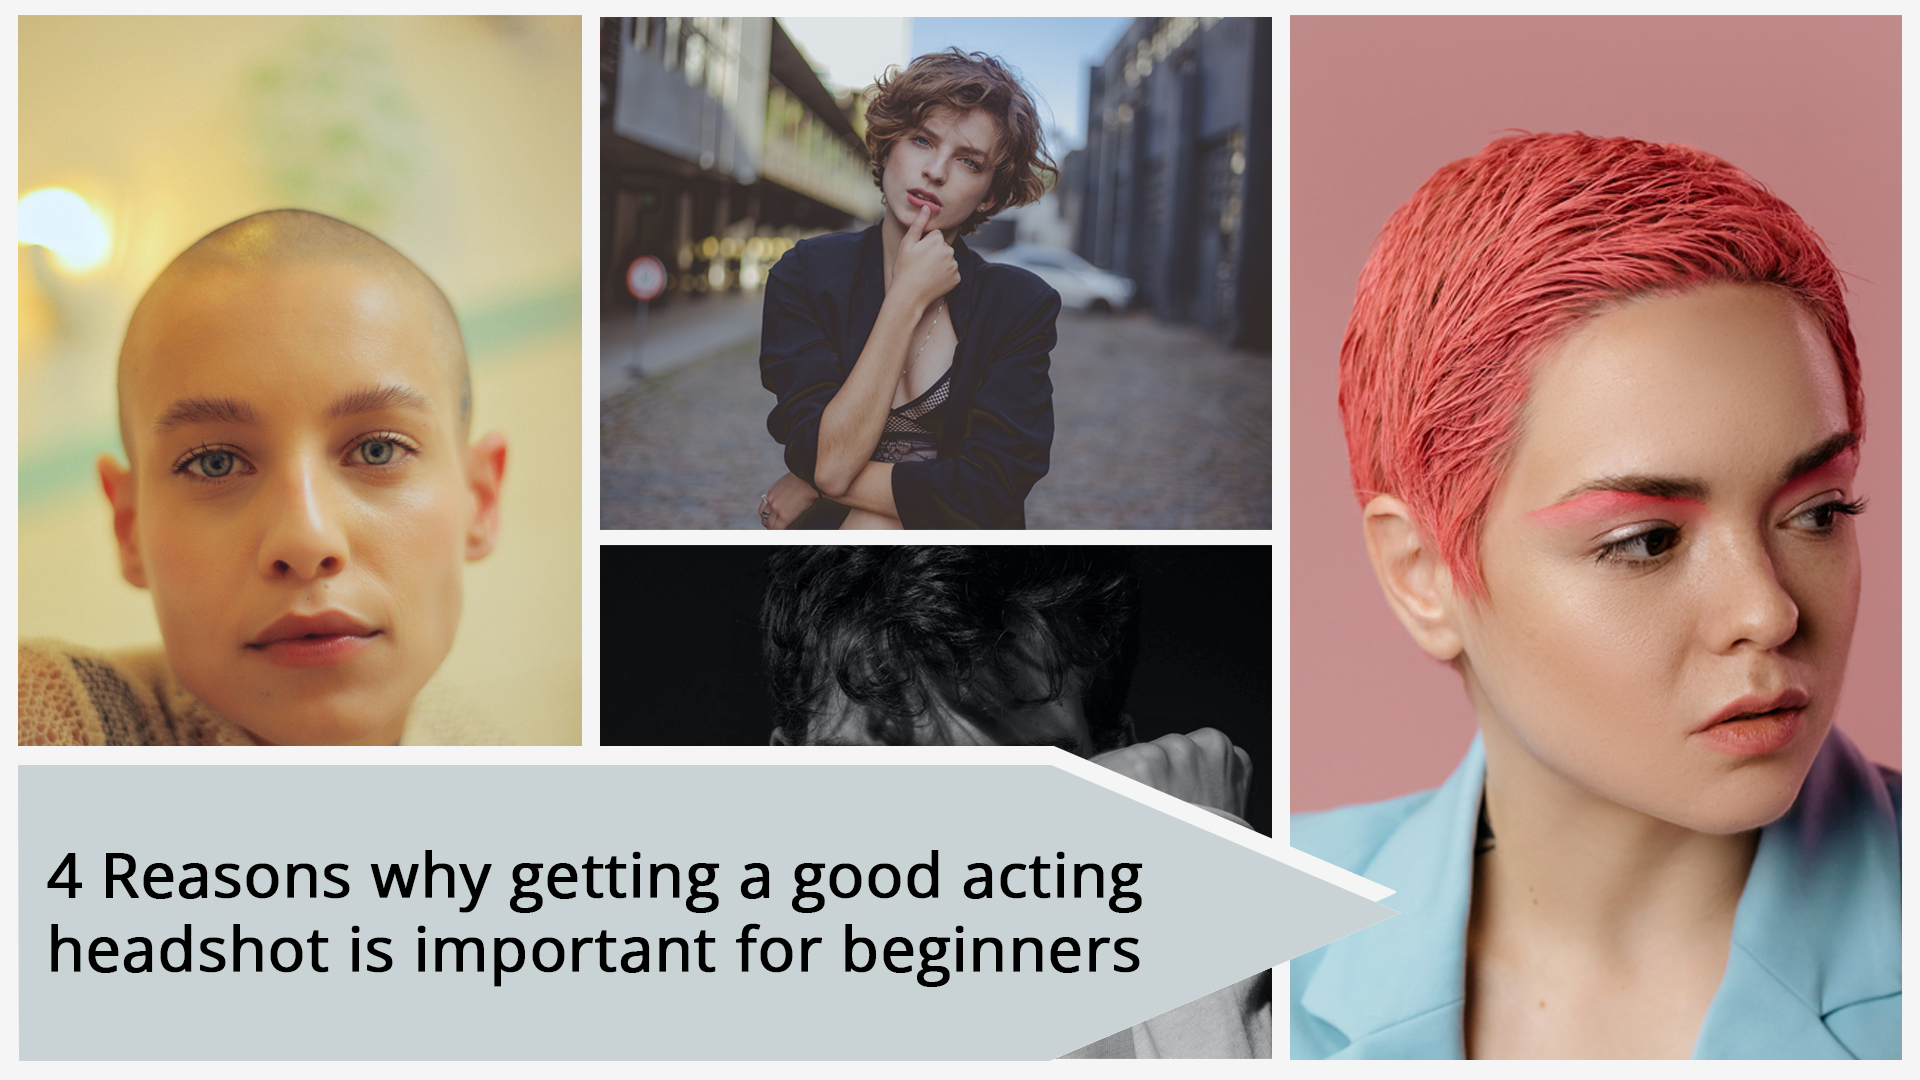 4 Reasons why getting a good acting headshot is important for beginners